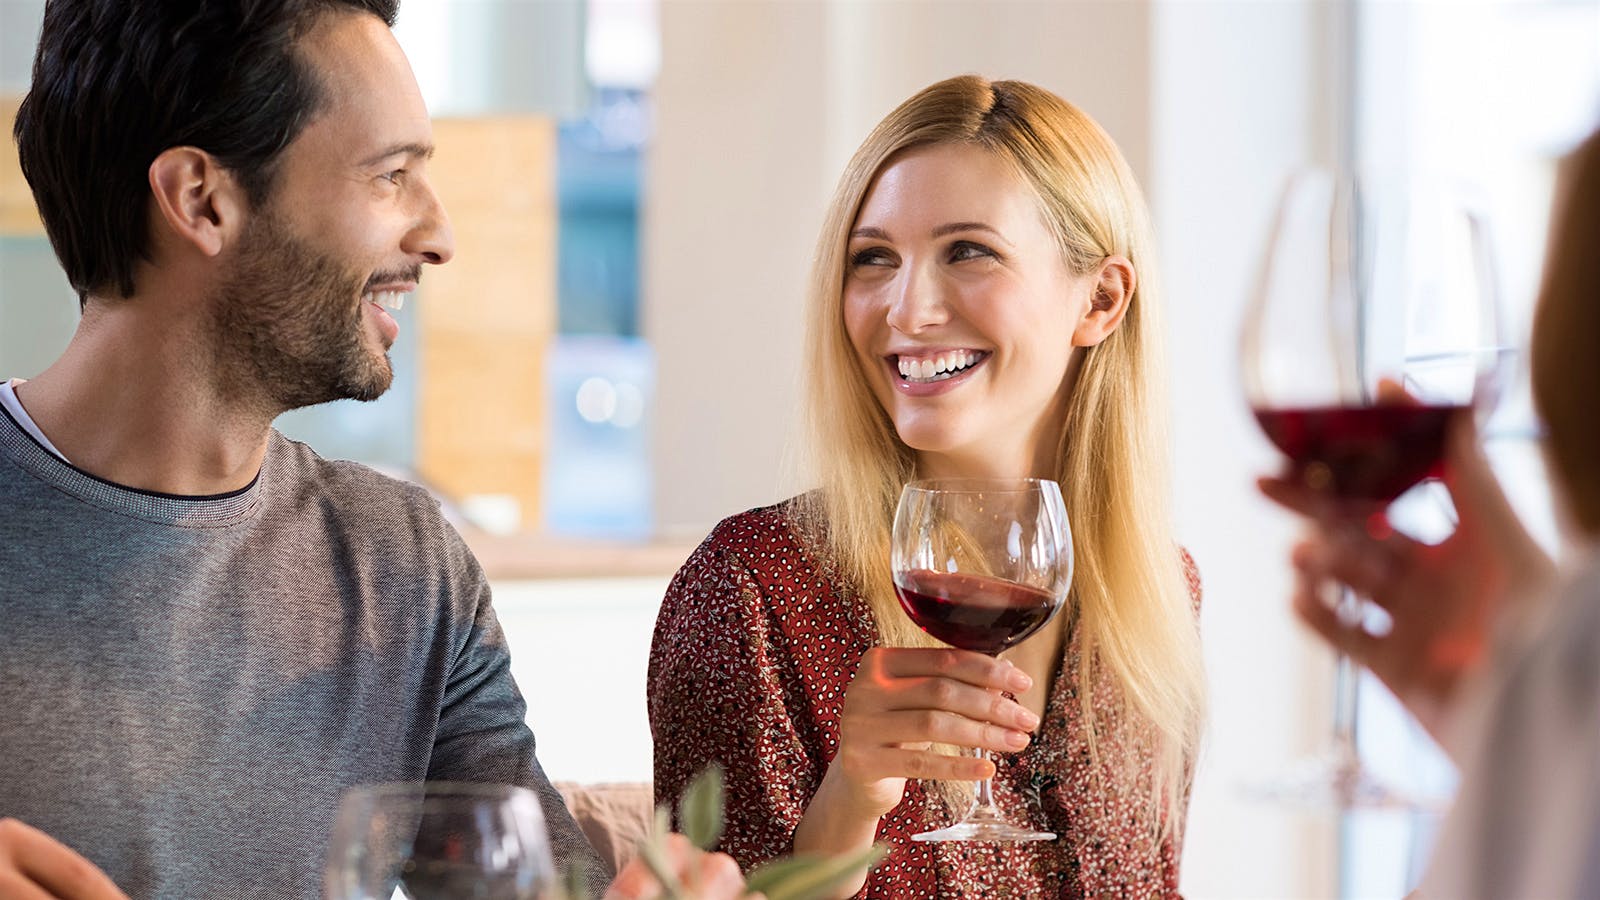 What Does Wine Do to Your Teeth?